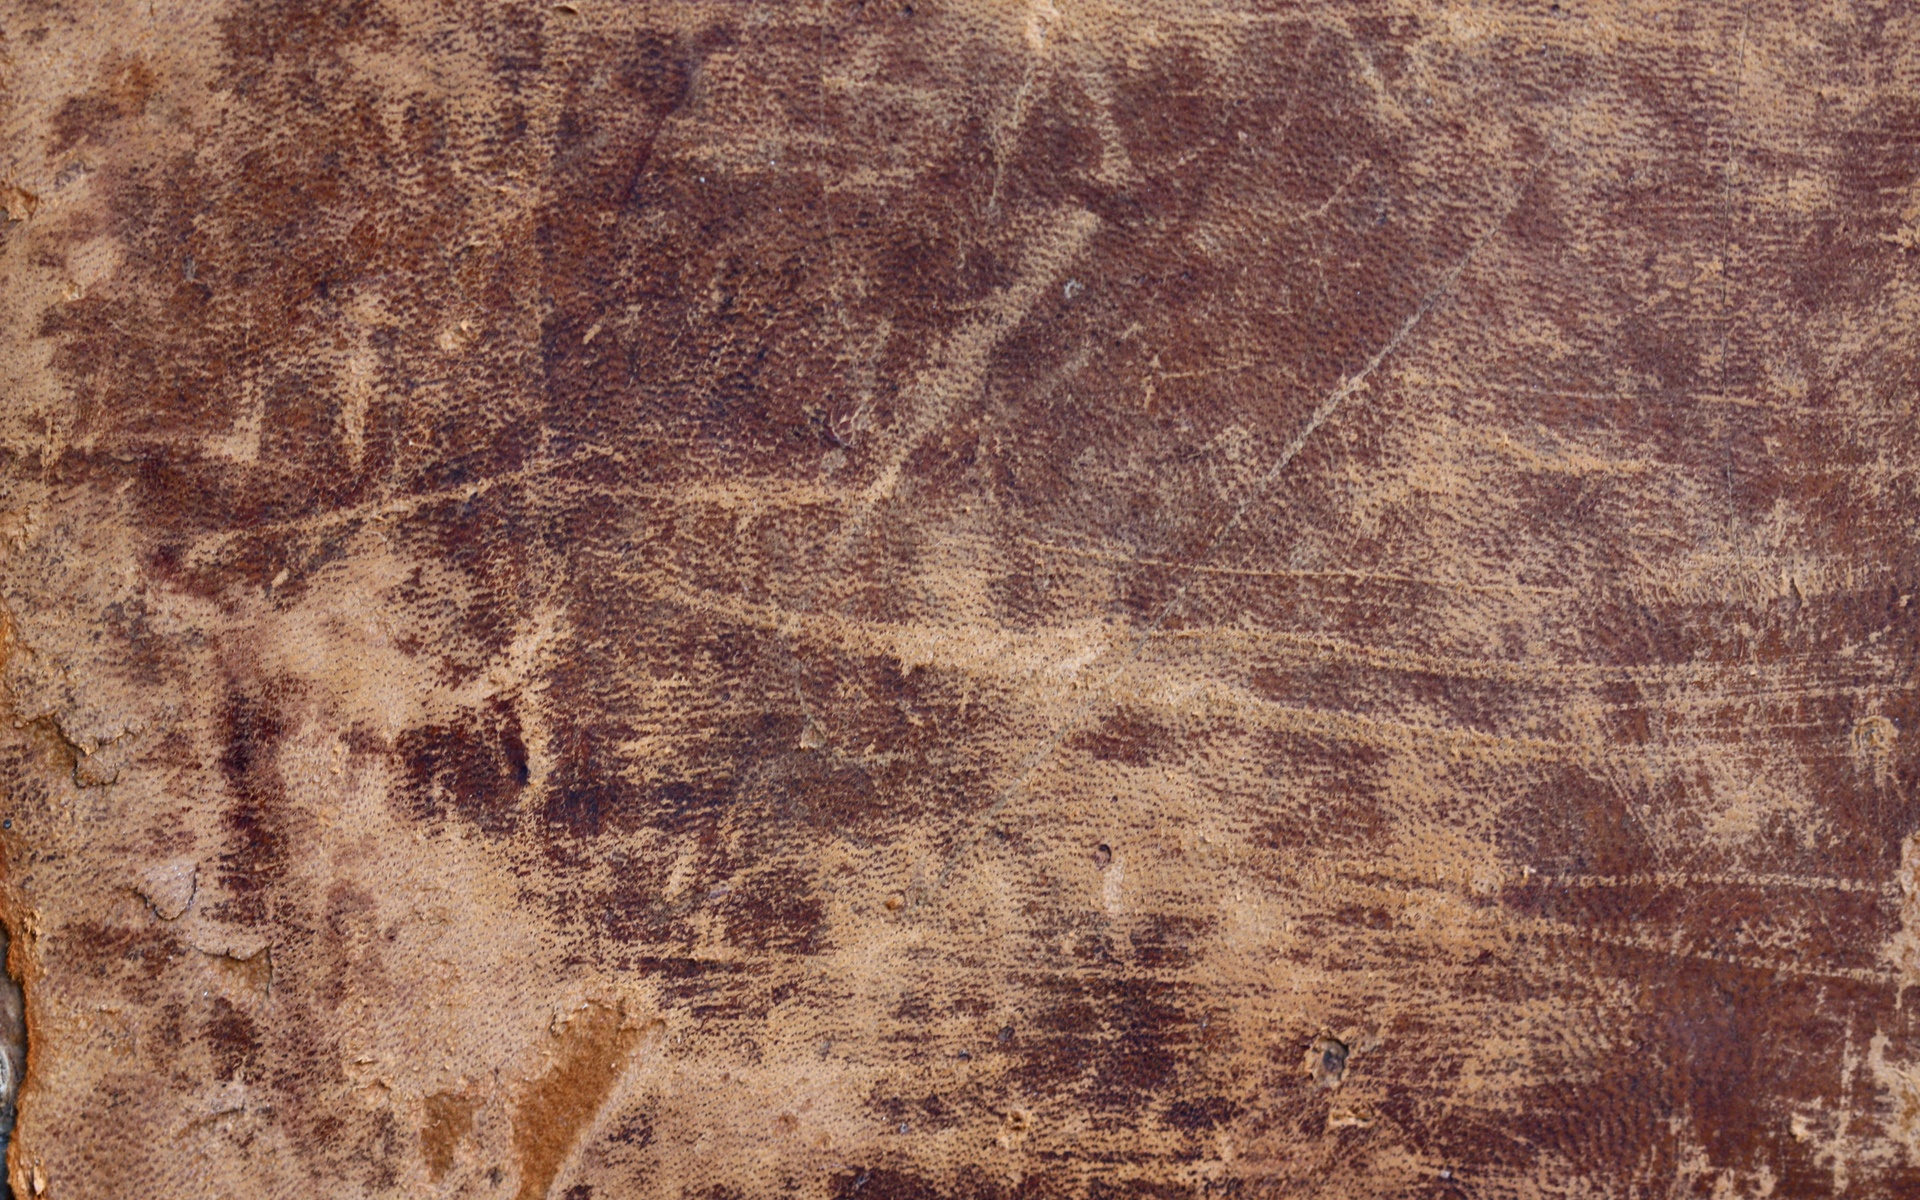 Free Download Old Leather Texture Wallpaper 19x10 For Your Desktop Mobile Tablet Explore 47 19s Vintage Wallpaper Vintage Wallpaper 1930s And 1940s 19 Wallpaper Designs Reproduction Wallpaper 1930s